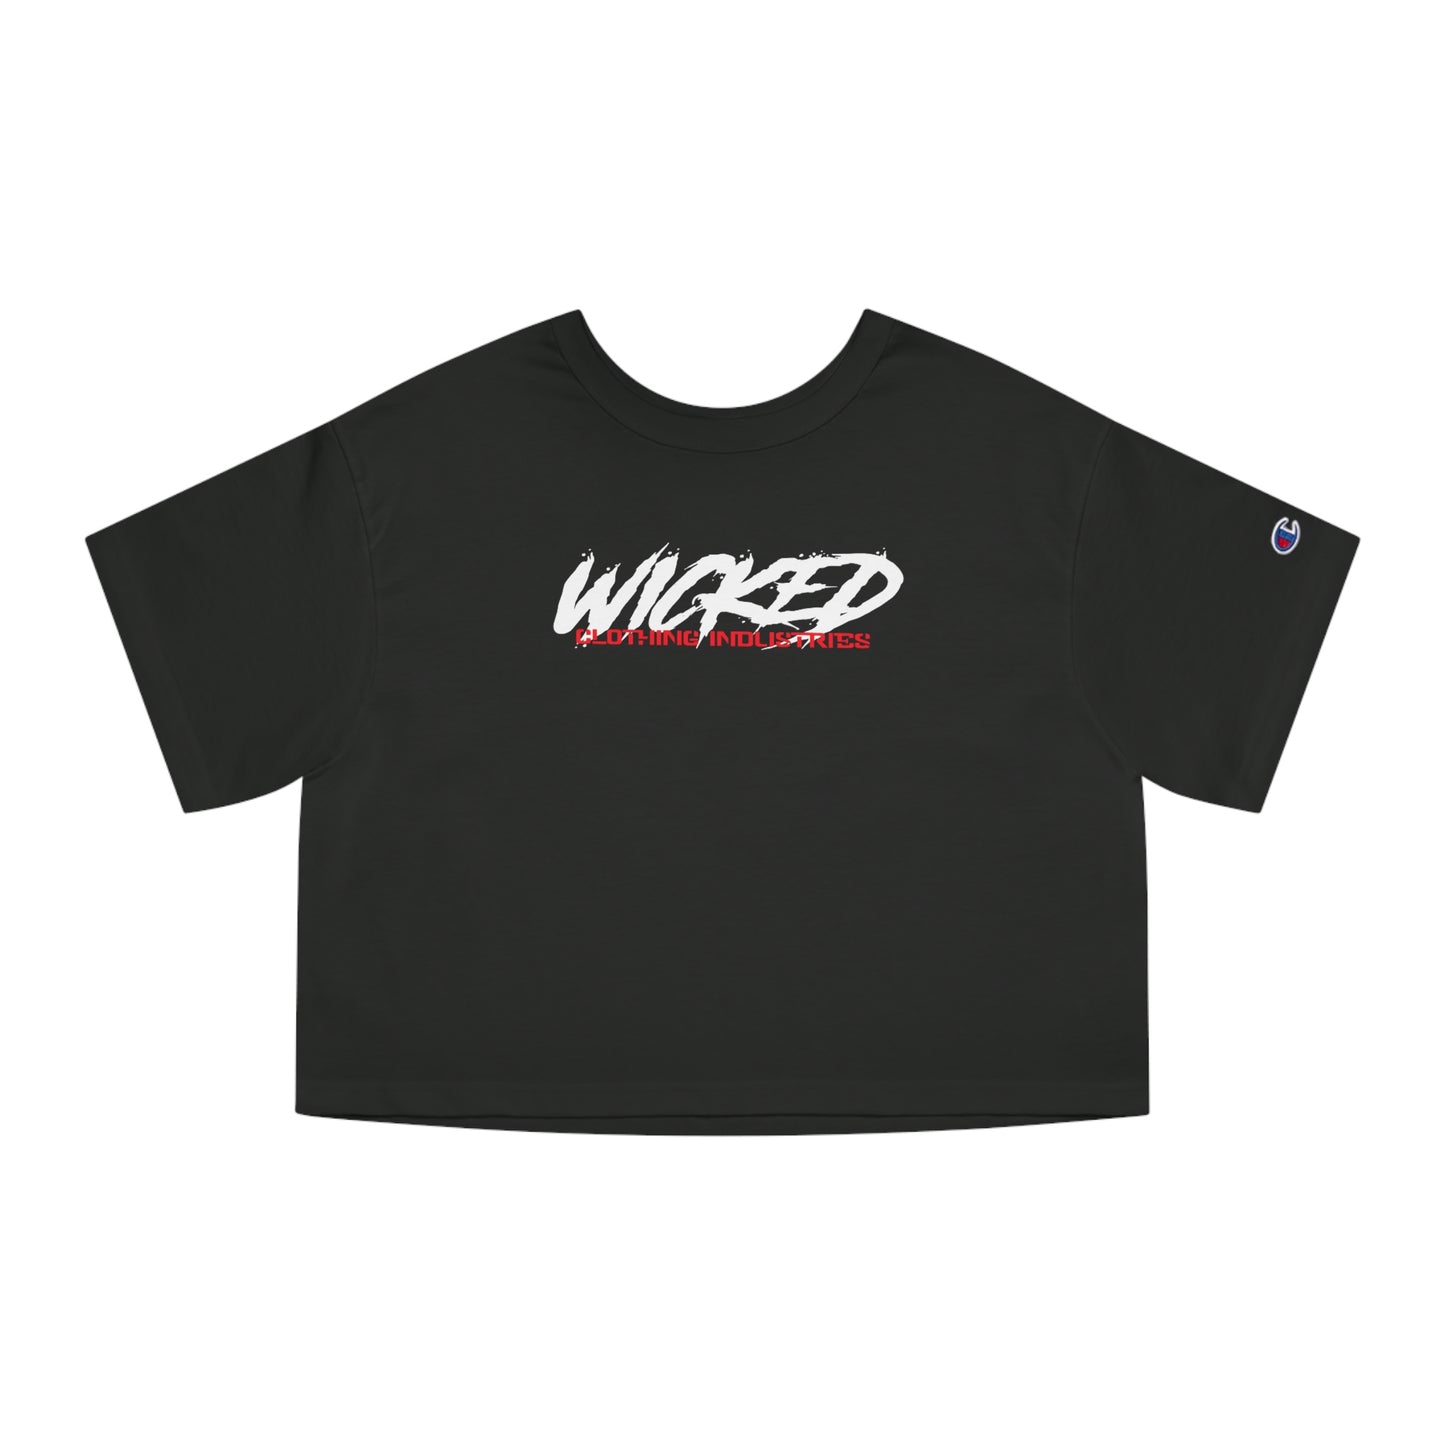 Wicked Wild 2 Cropped T-Shirt